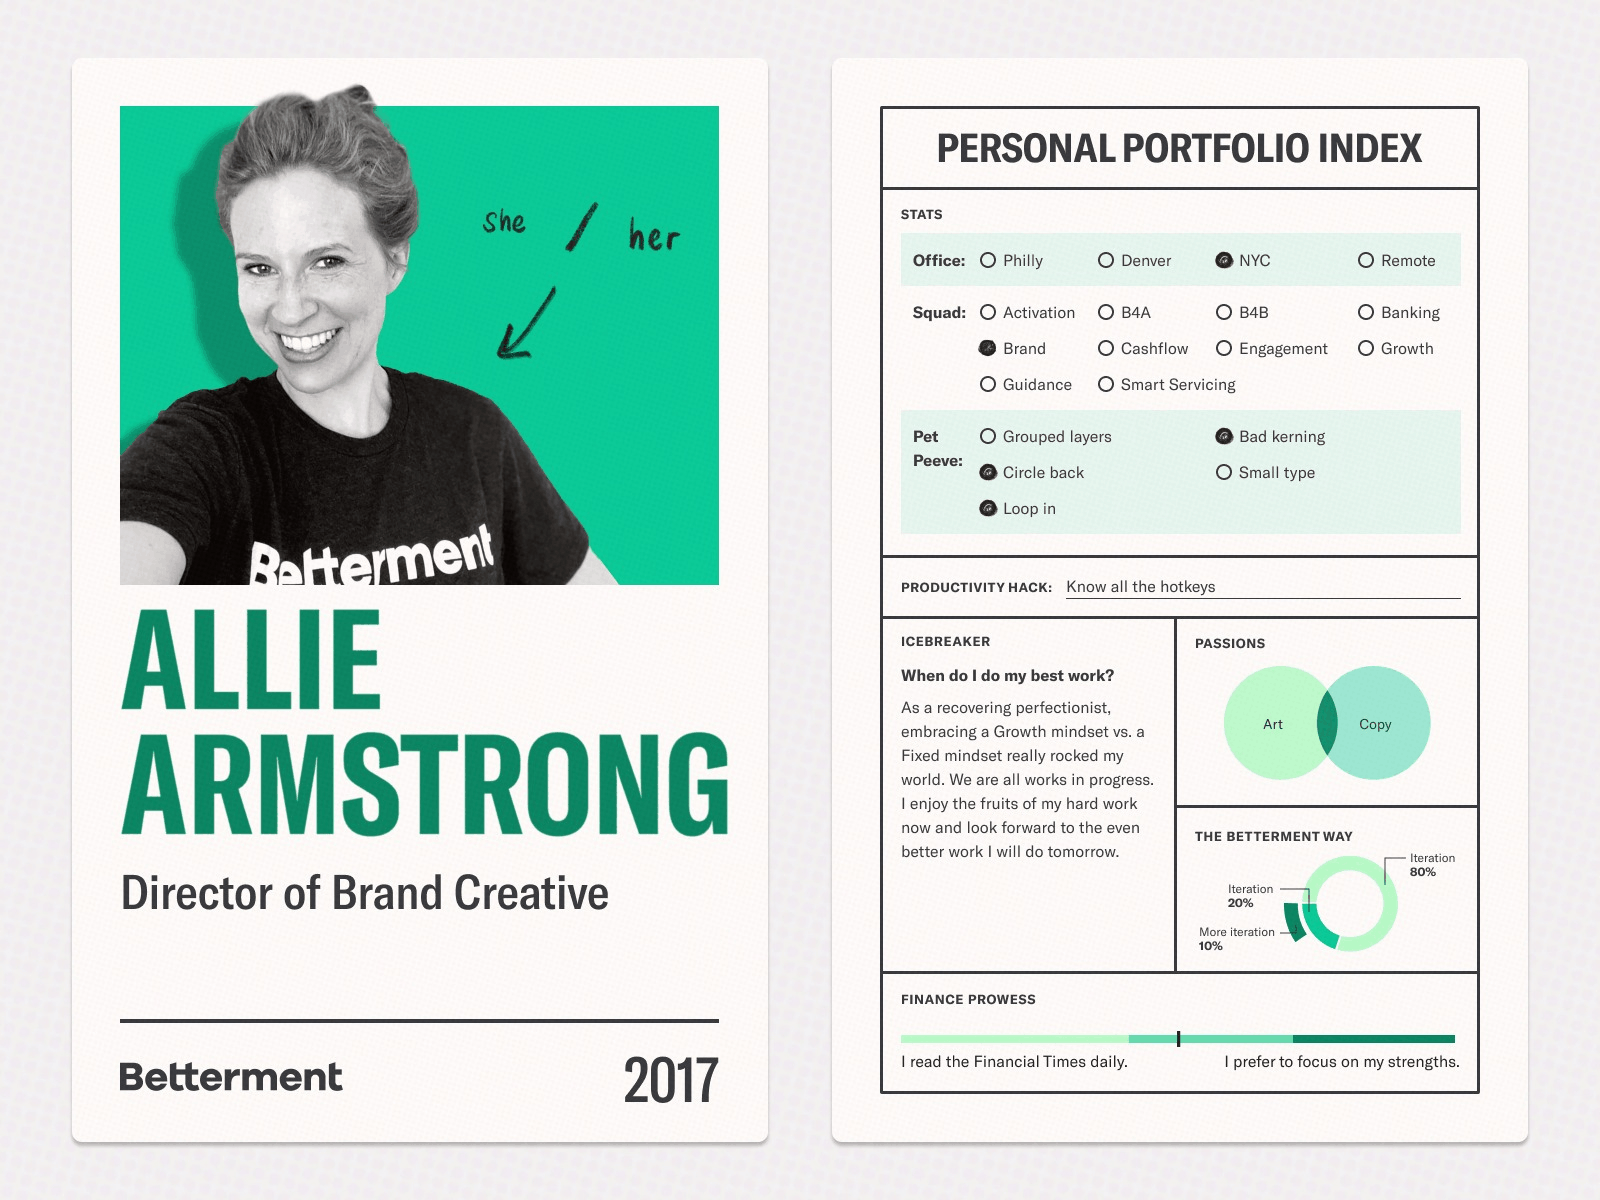 Betterment Design and Product team trading cards